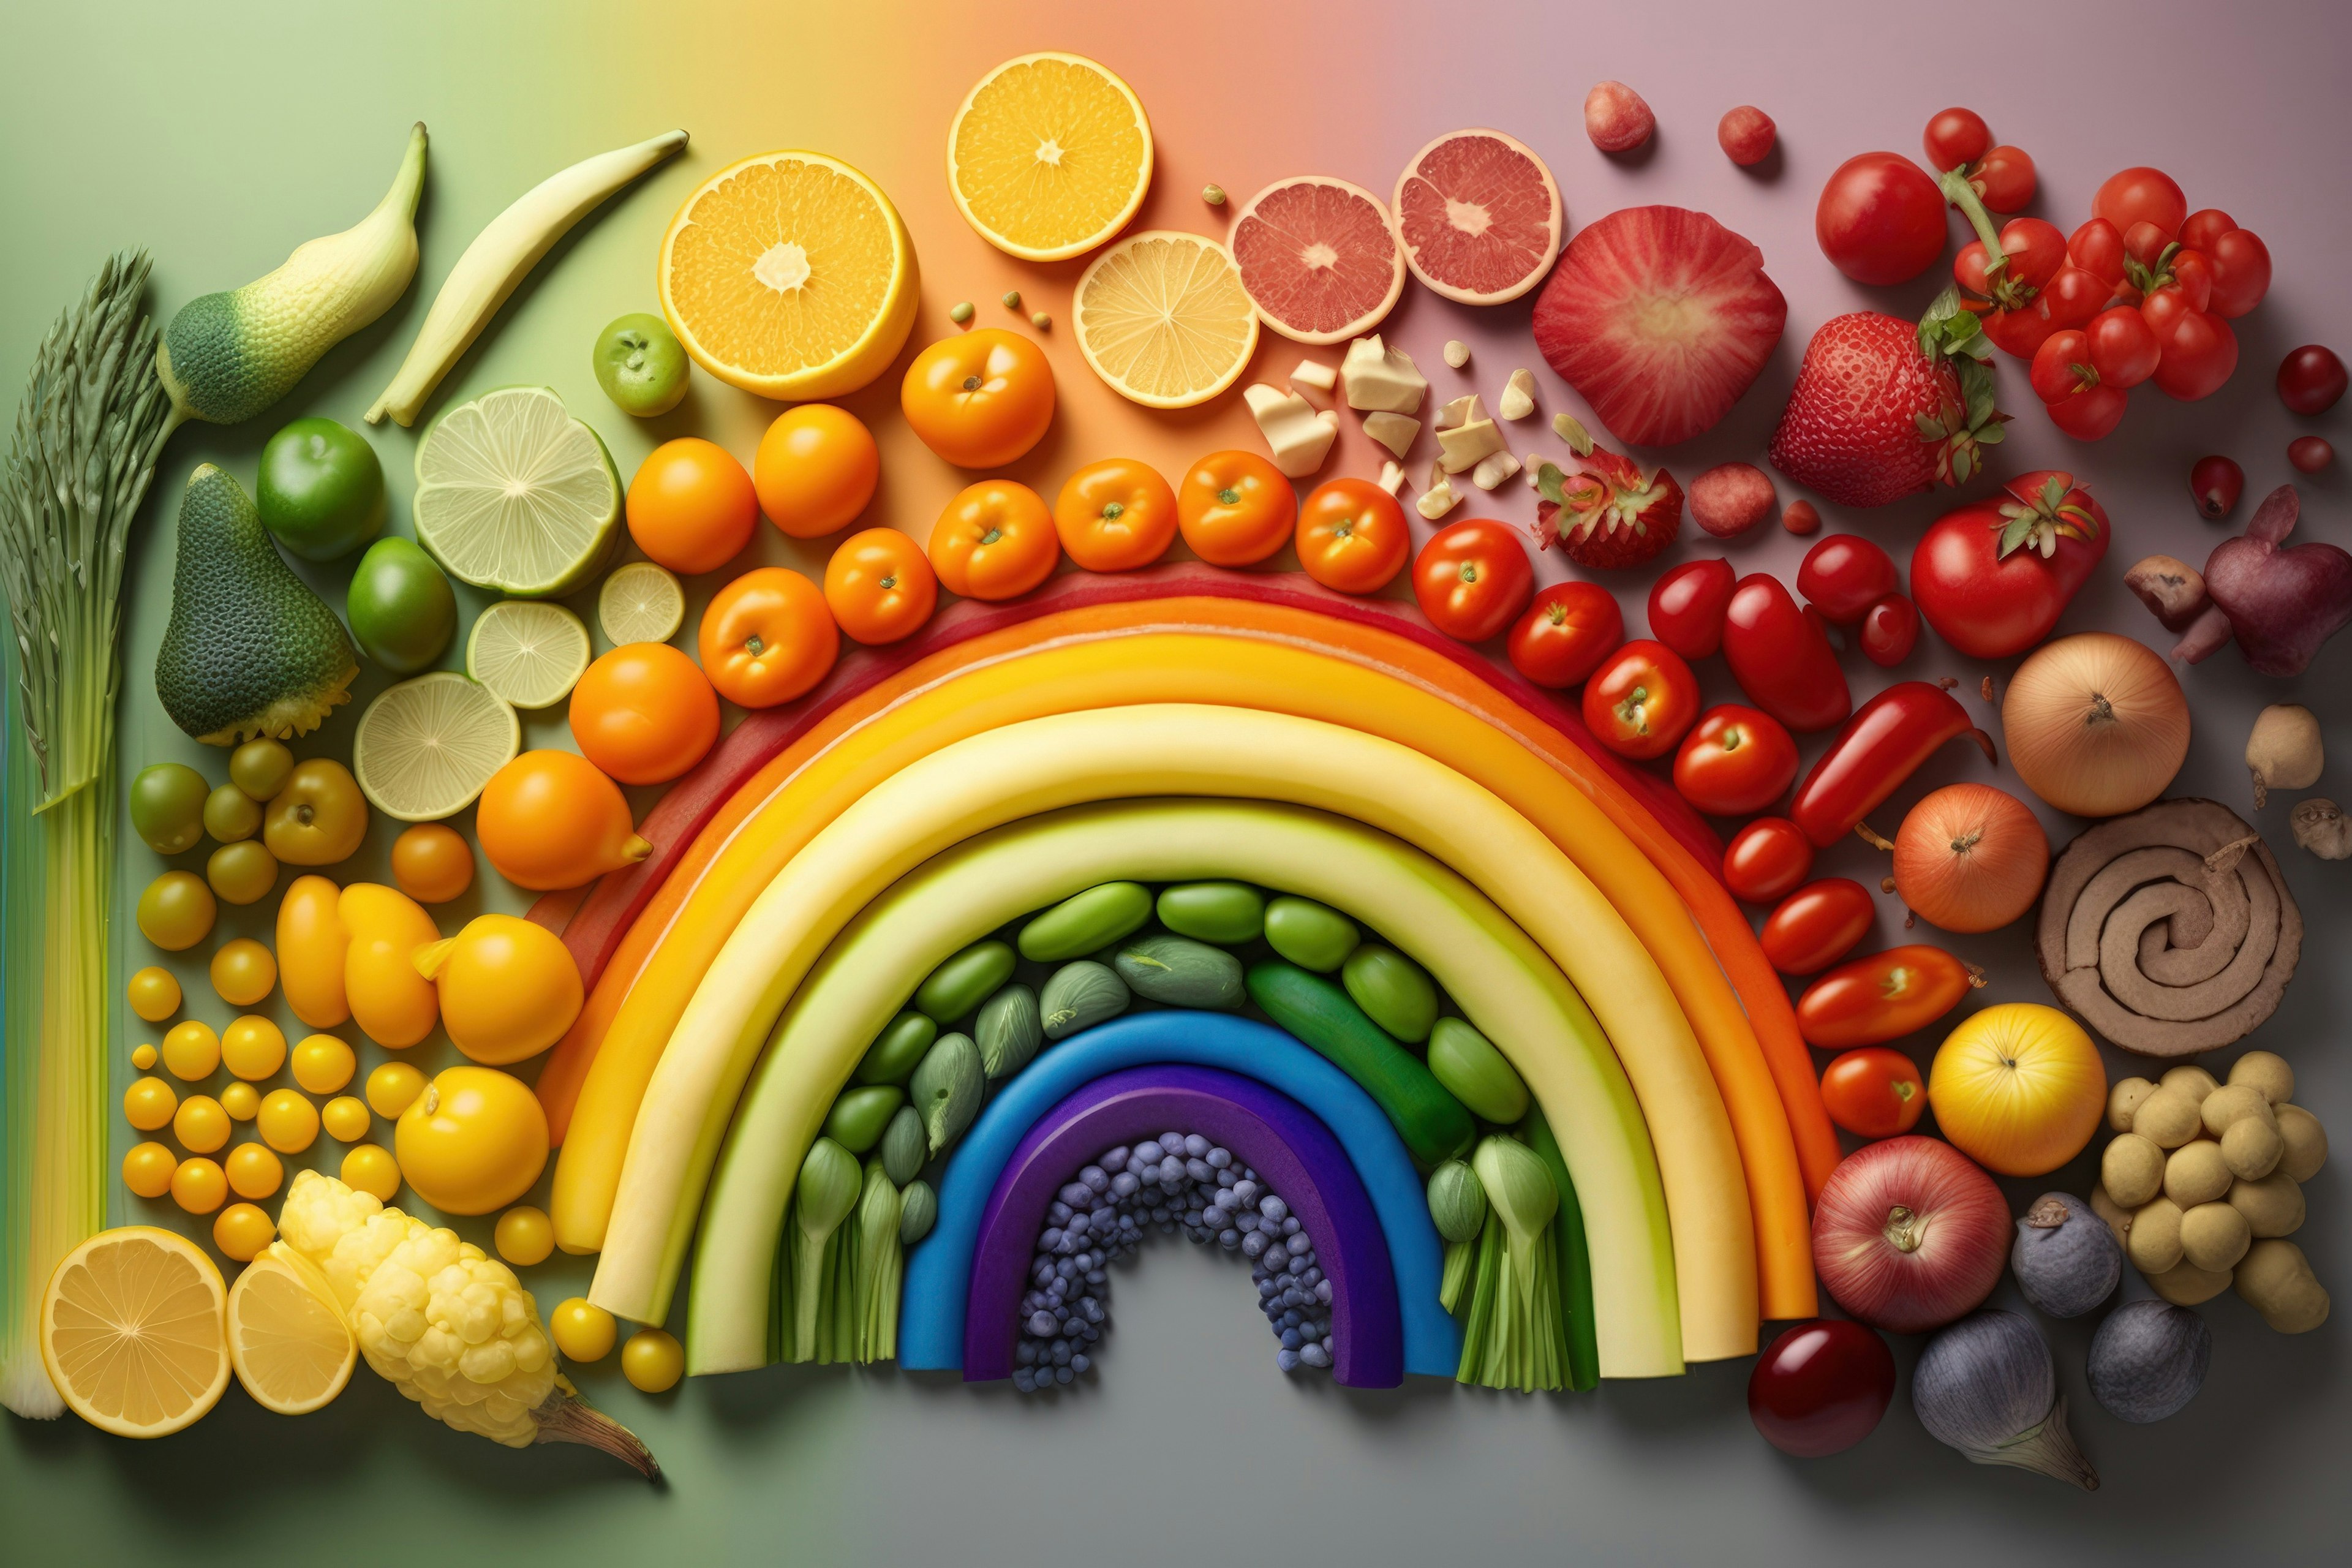 Healthy Veggies and fruits aligned in rainbow color and shape